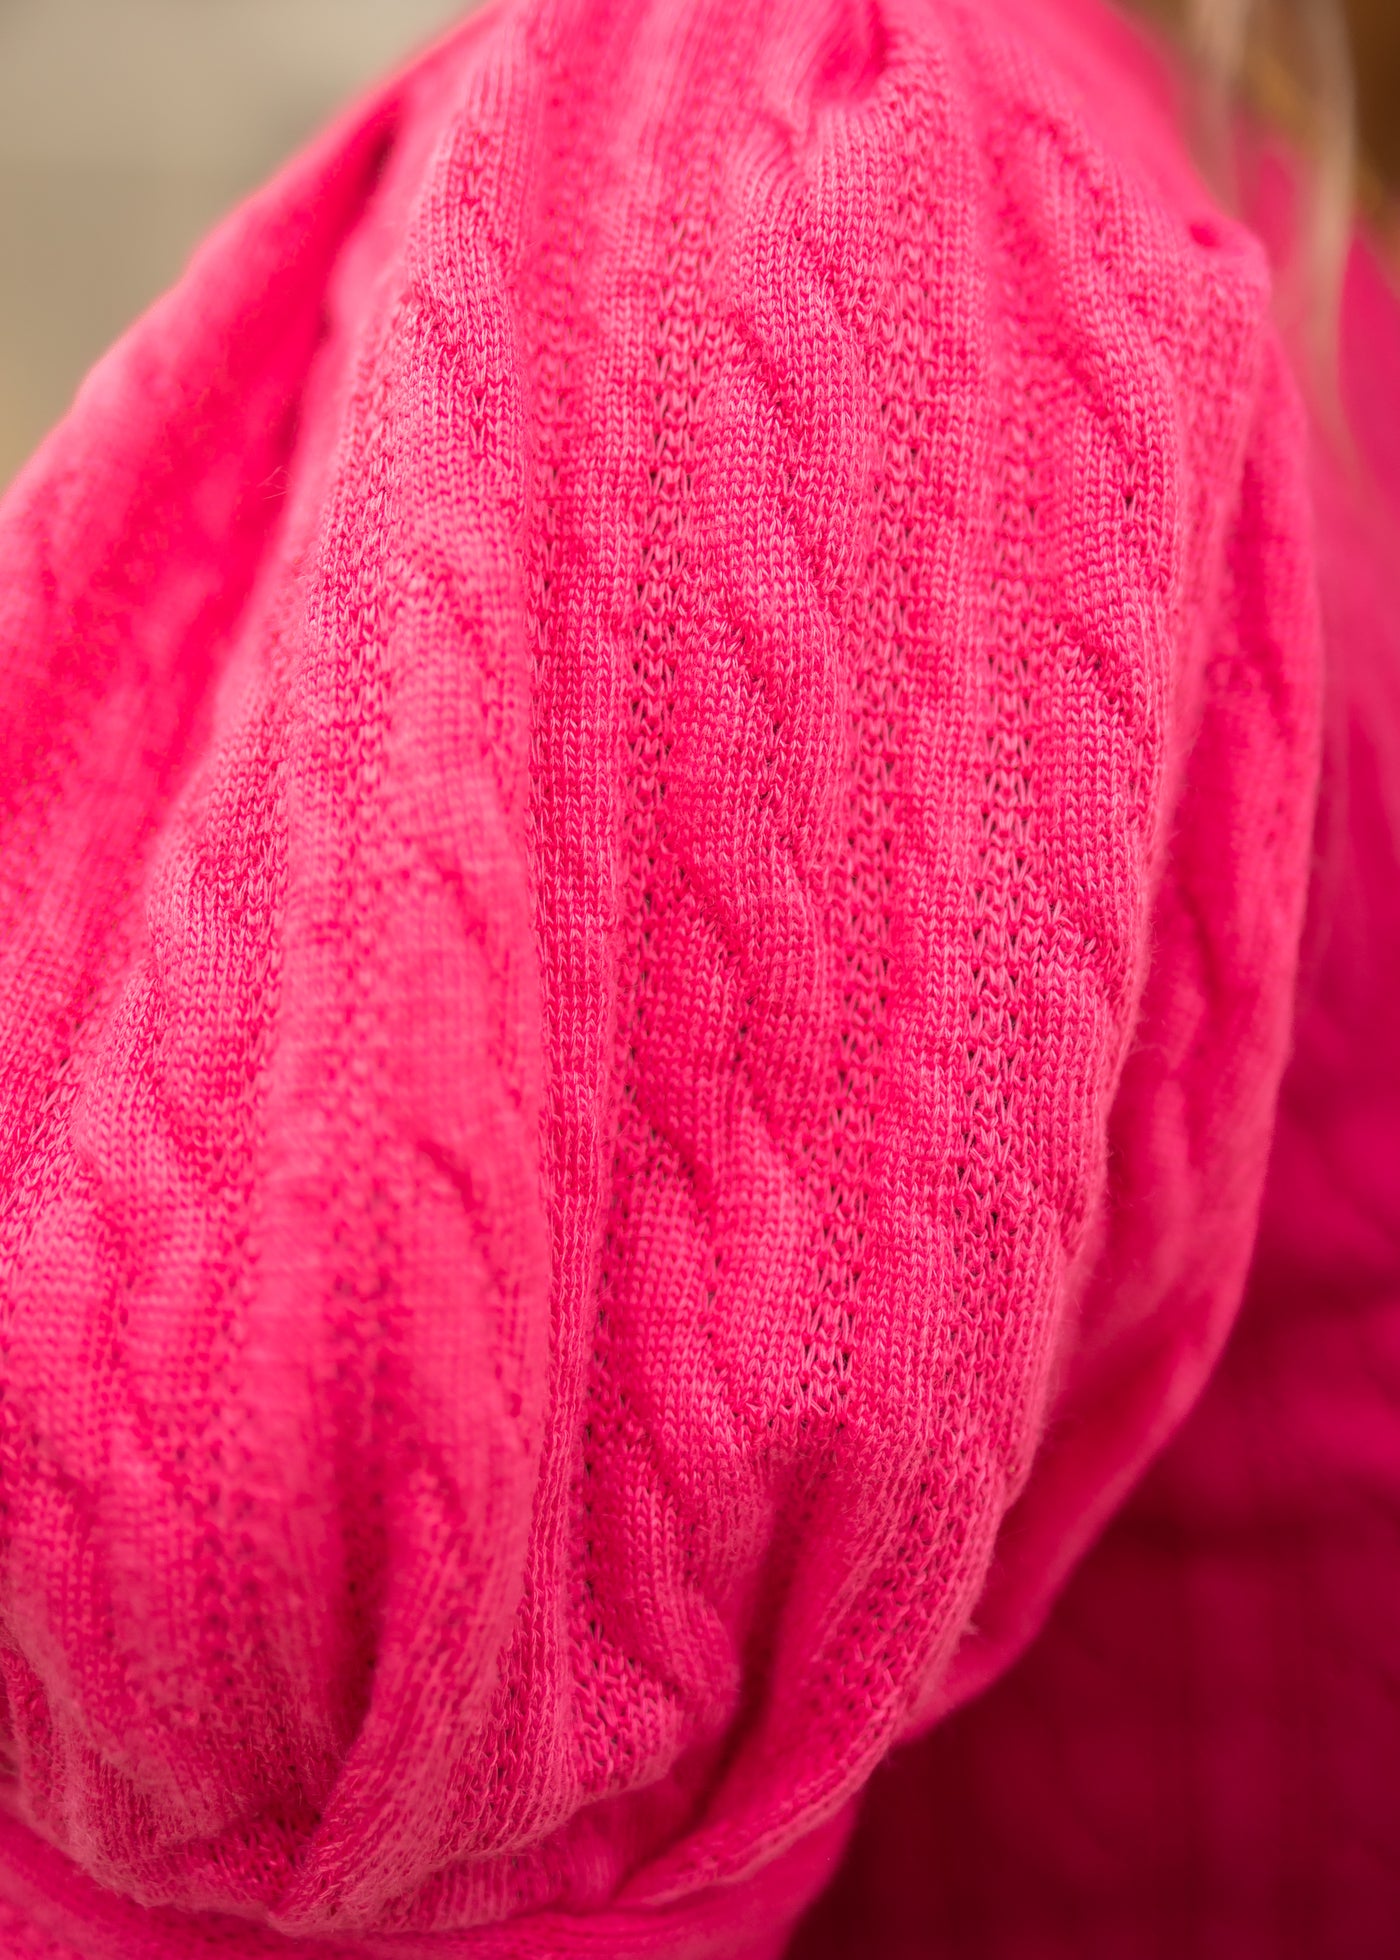 Sweater knit pattern of a hot pink top